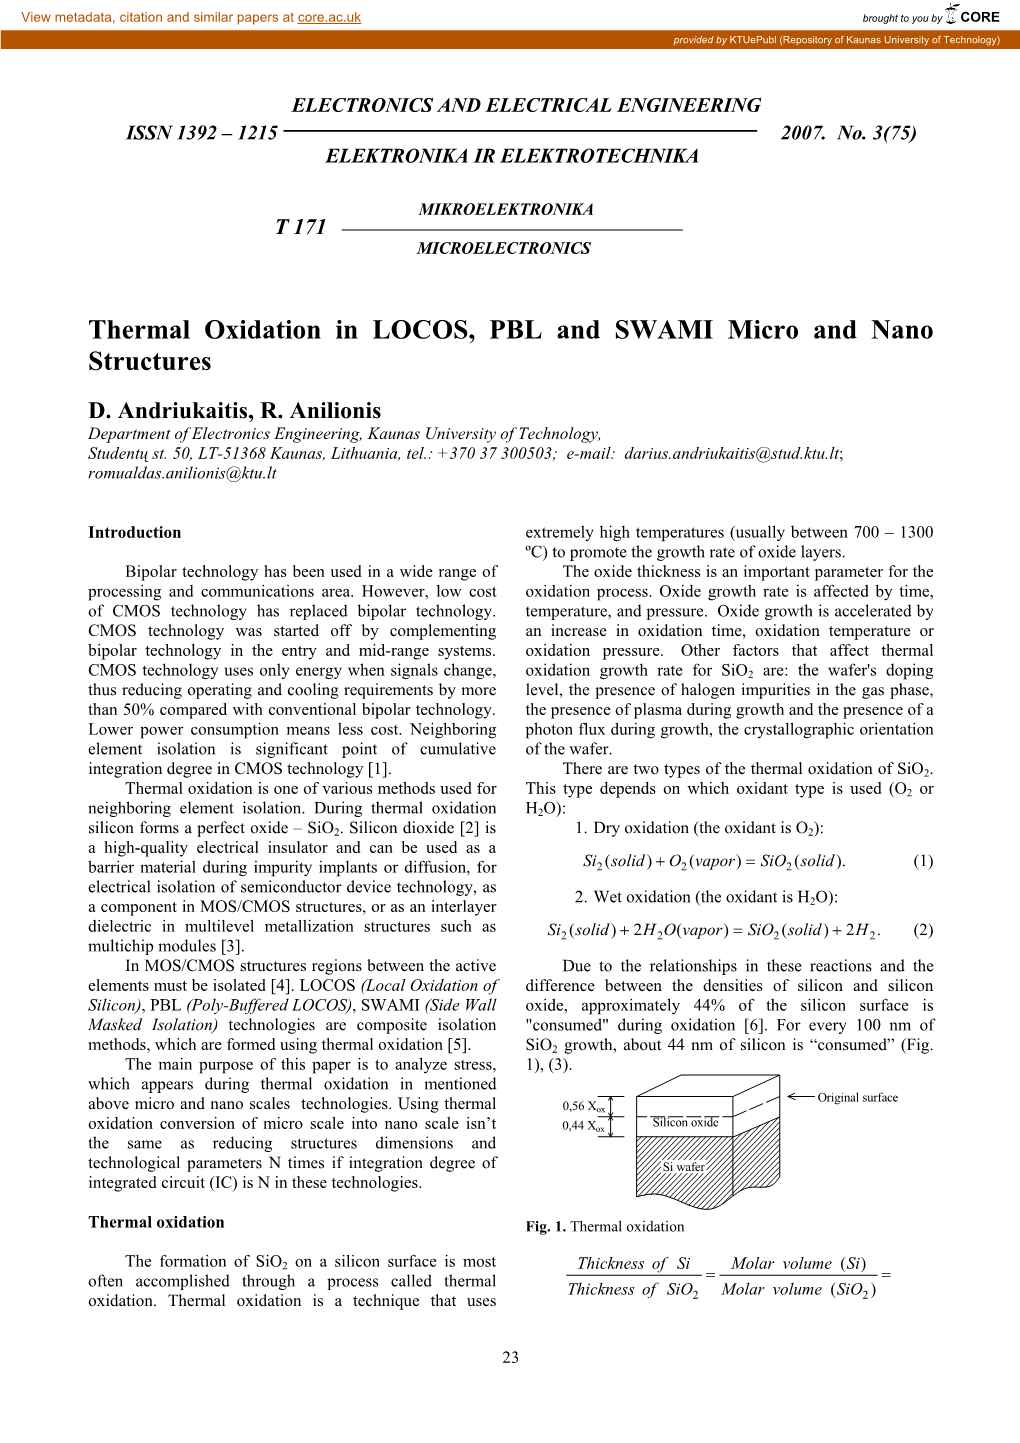 Thermal Oxidation in LOCOS, PBL and SWAMI Micro and Nano Structures